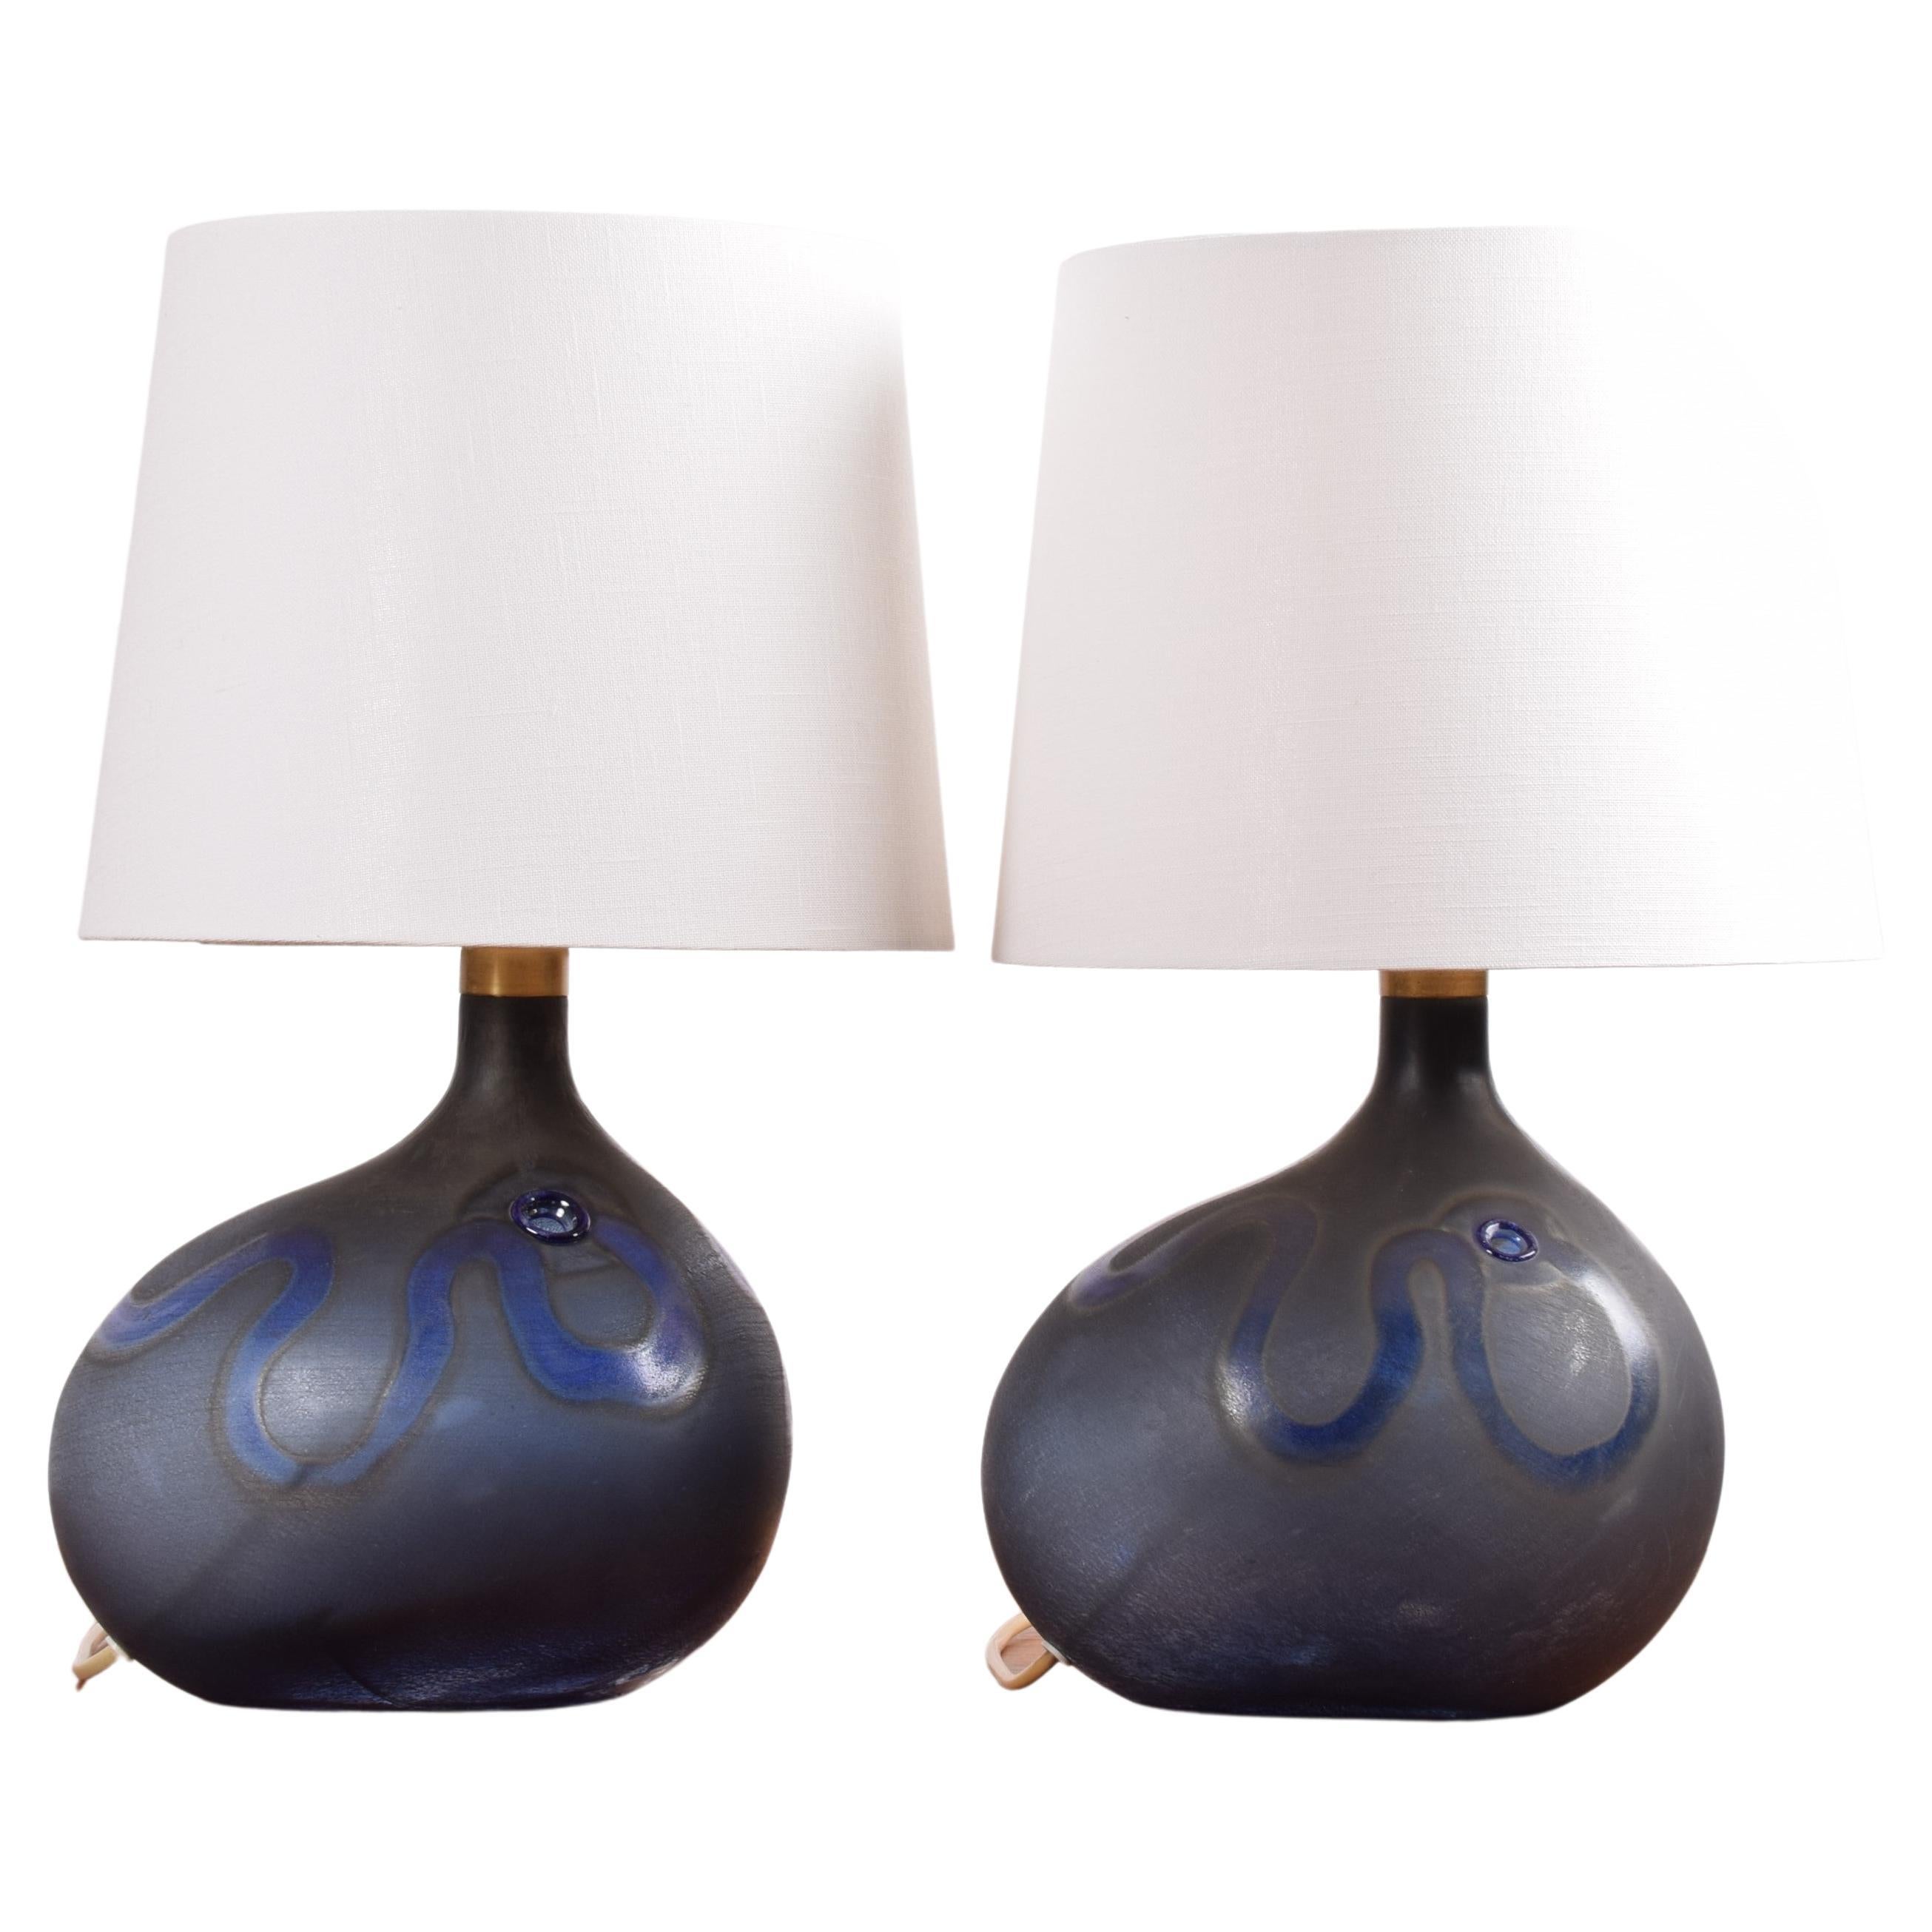 Pair of Holmegaard Blue Sculptural Glass Table Lamps Medium, Danish Modern 1970s For Sale